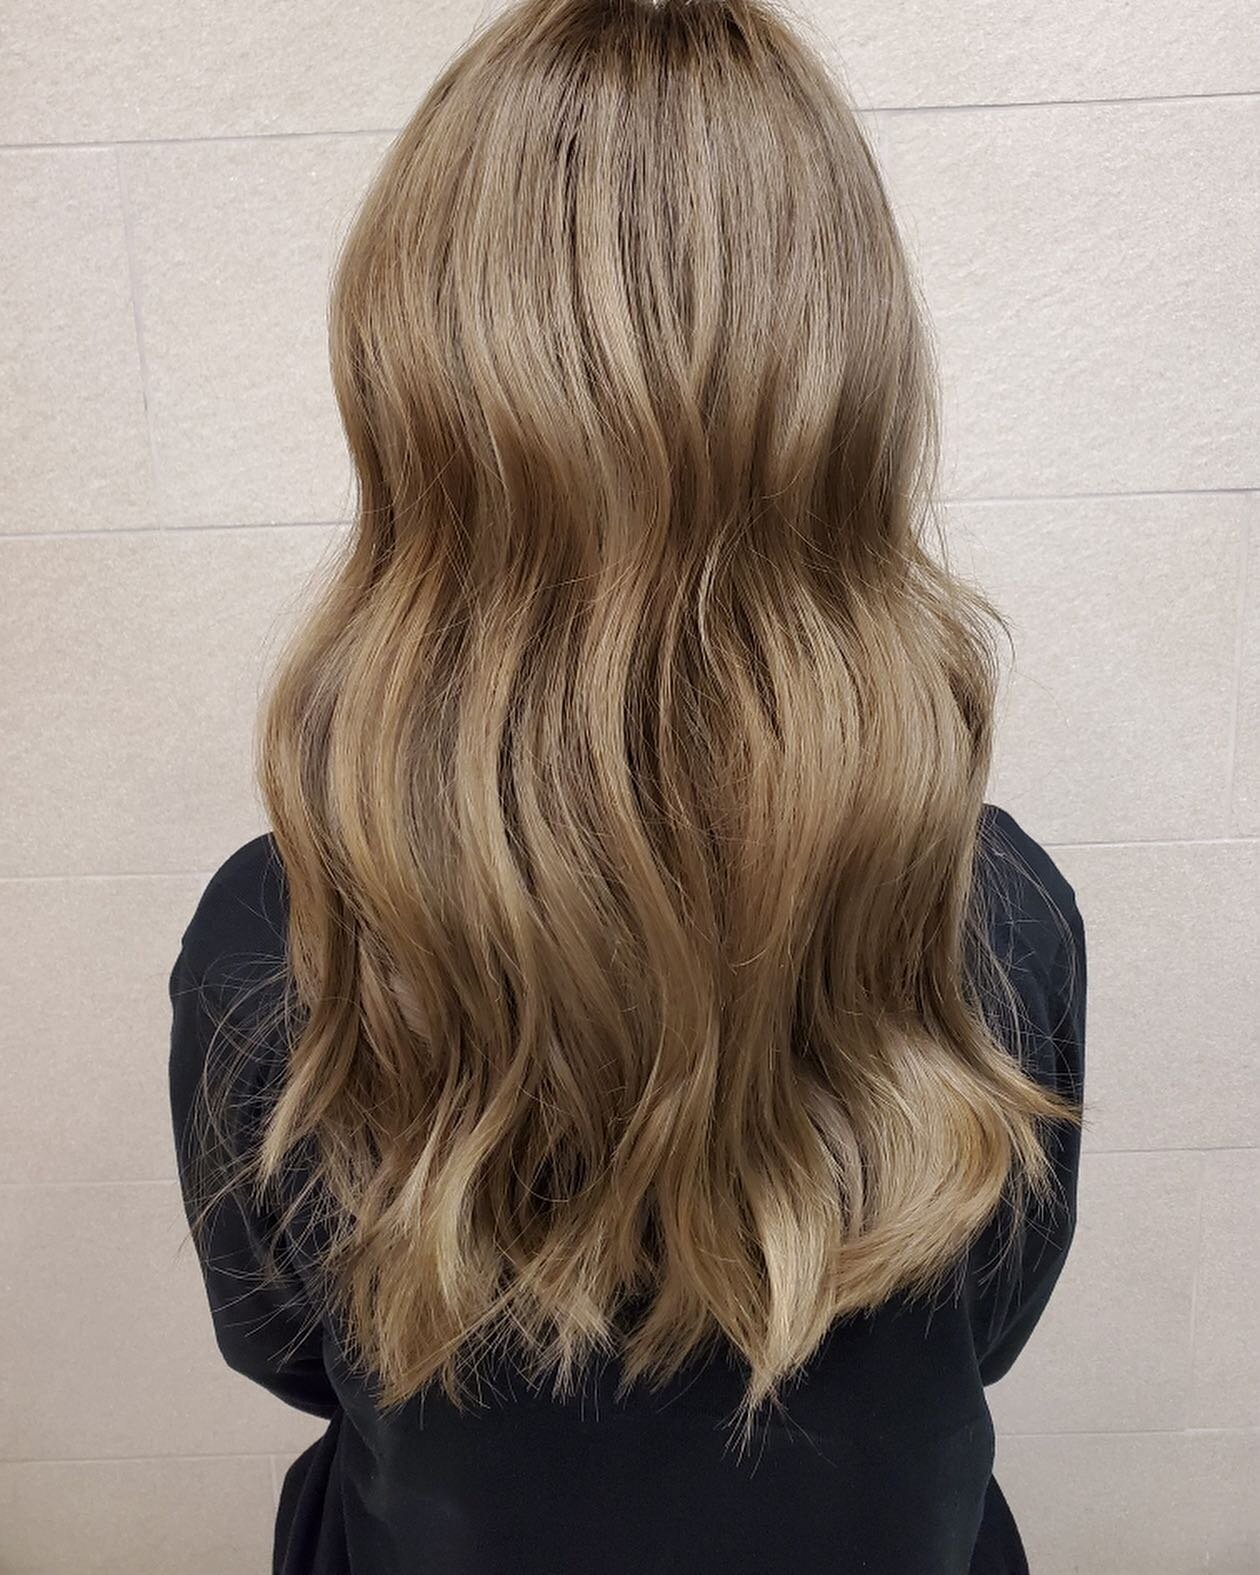 Check out this color correction ✅
.
.
.
Jenny did a full bleach to get rid of all brassiness and to get her client to a light &ldquo;mushroom brown.&rdquo; Add a haircut on top and voila! So pretty, yeah?!
.
.
.
@_jennysorakong #ashbrown #colorcorrec